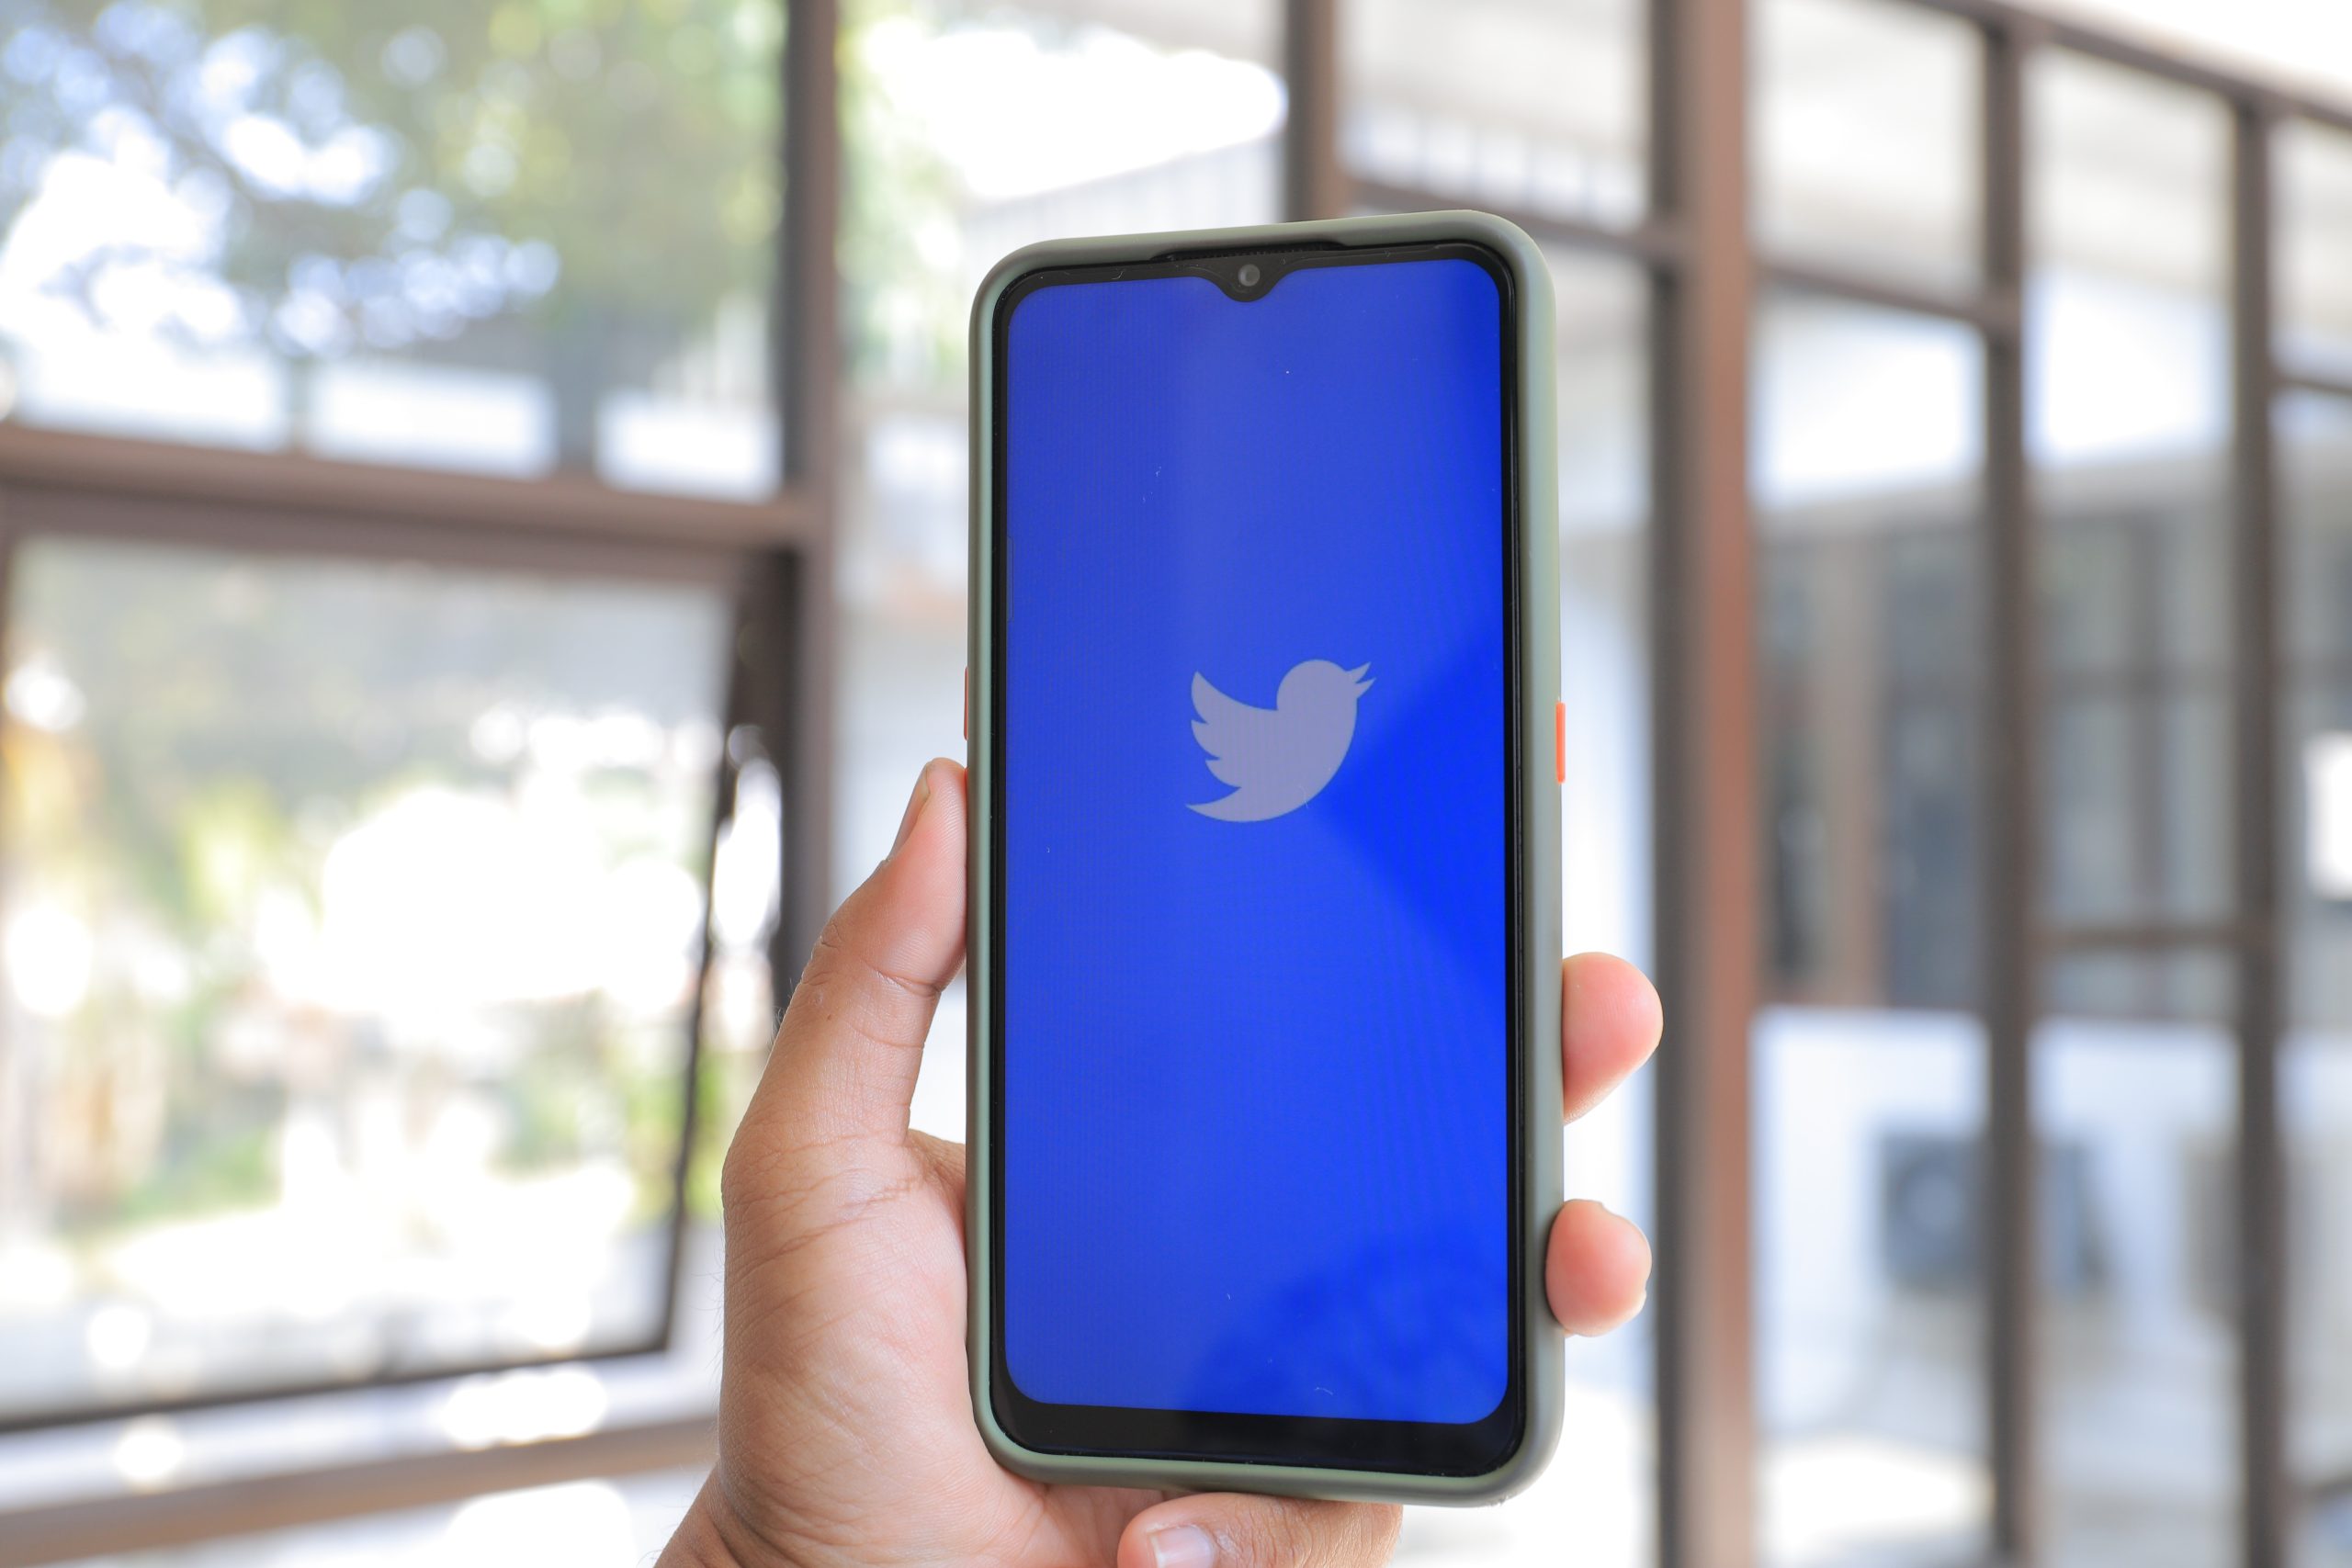 Twitter Users Beware: Deleted Tweets May Not Be Gone Forever